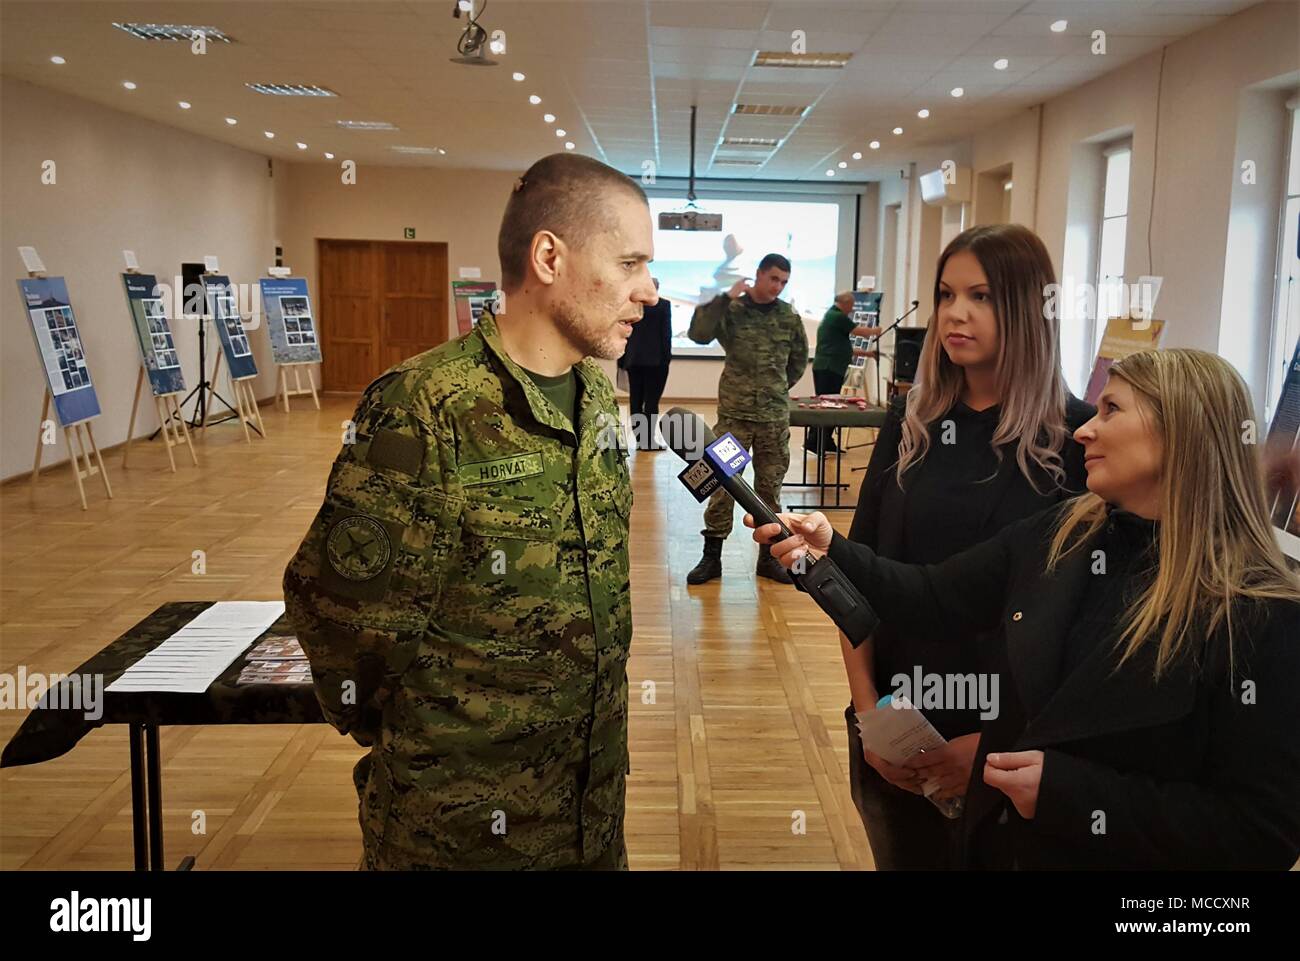 Croatian Army Capt. Slaven Horvat, assigned to the Croatian Volcano Battery and Battle Group Poland conducts an interview with Polish media TVP3 explaining the Croatian cultural heritage events, Sylwia Pindor (center) serves as linguist during the interview at the Polish 15th Mechanized Brigade headquarters Giżycko, Poland, Feb. 12, 2018. The celebration allowed the ambassador to express gratitude to Polish leaders and shared Croatian culture with the community leaders in attendance. The unique, multinational battle group is comprised of U.S., U.K., Croatian and Romanian soldiers serve with th Stock Photo